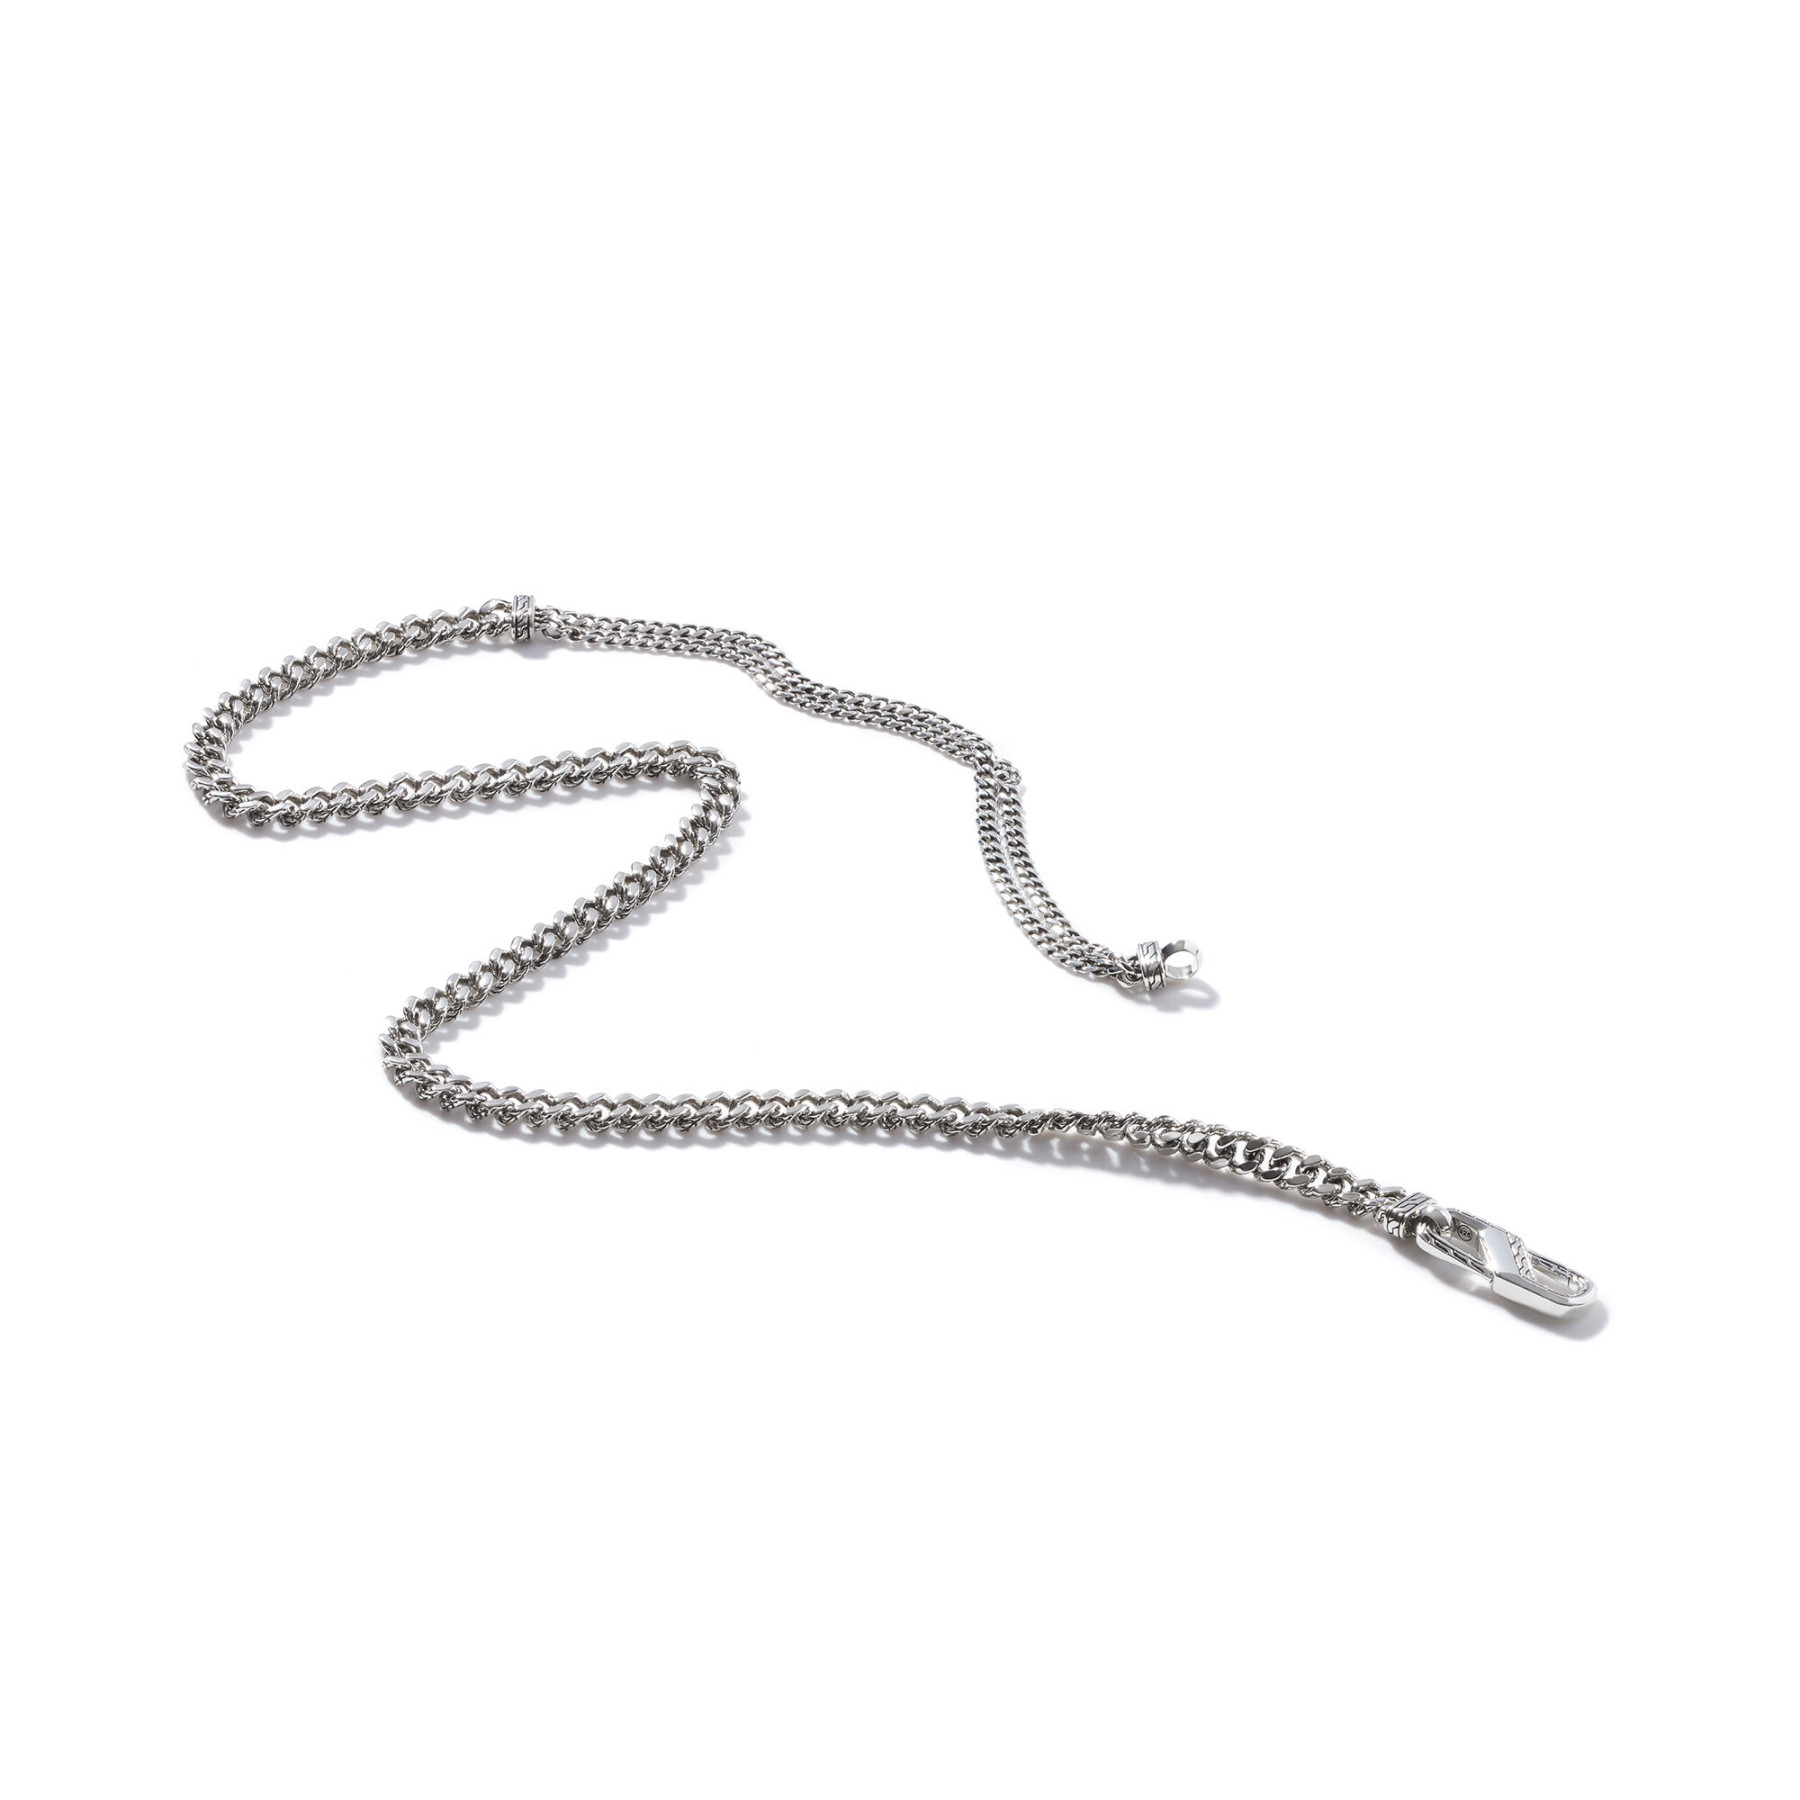 John Hardy Classic Chain Silver 7mm Curb Link Necklace in Metallic for Men Mens Jewellery Necklaces 